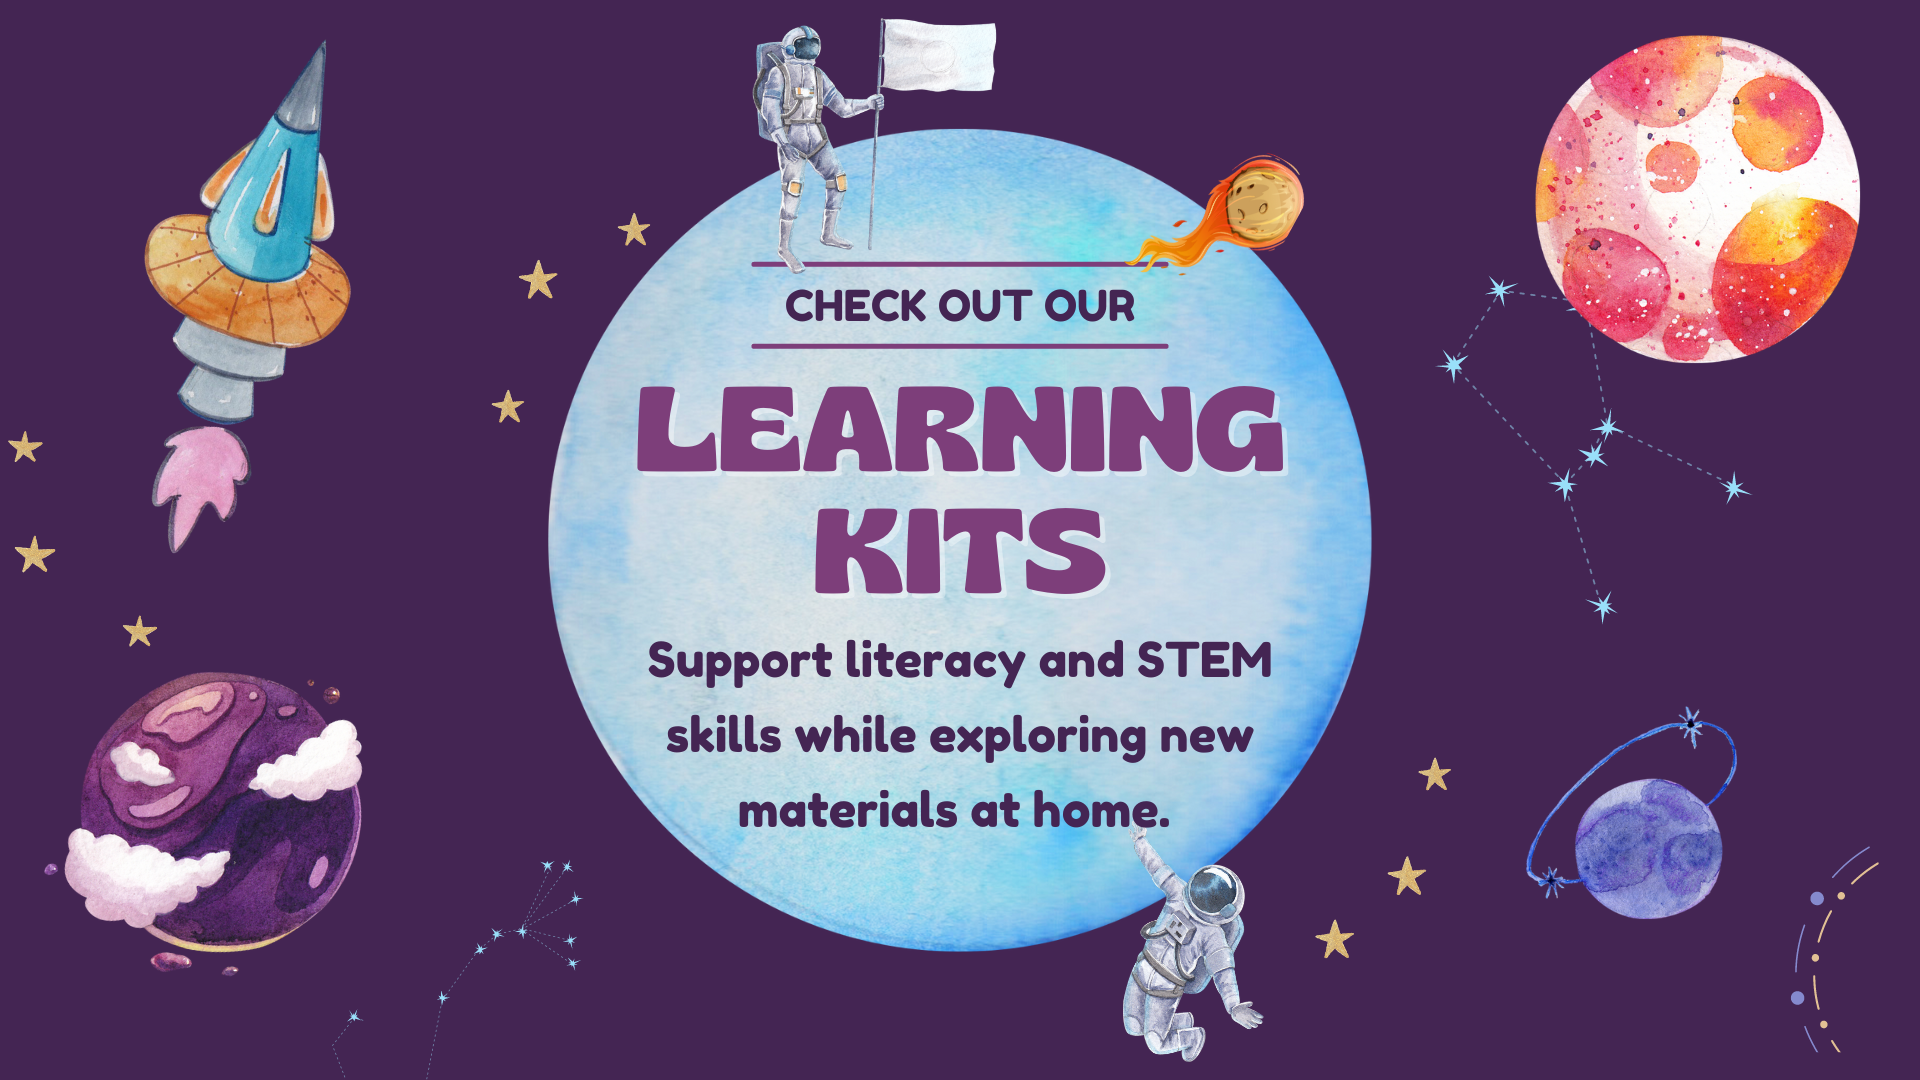 Check out our Learning Kits. Support literacy and STEM skills while playing with new materials at home.